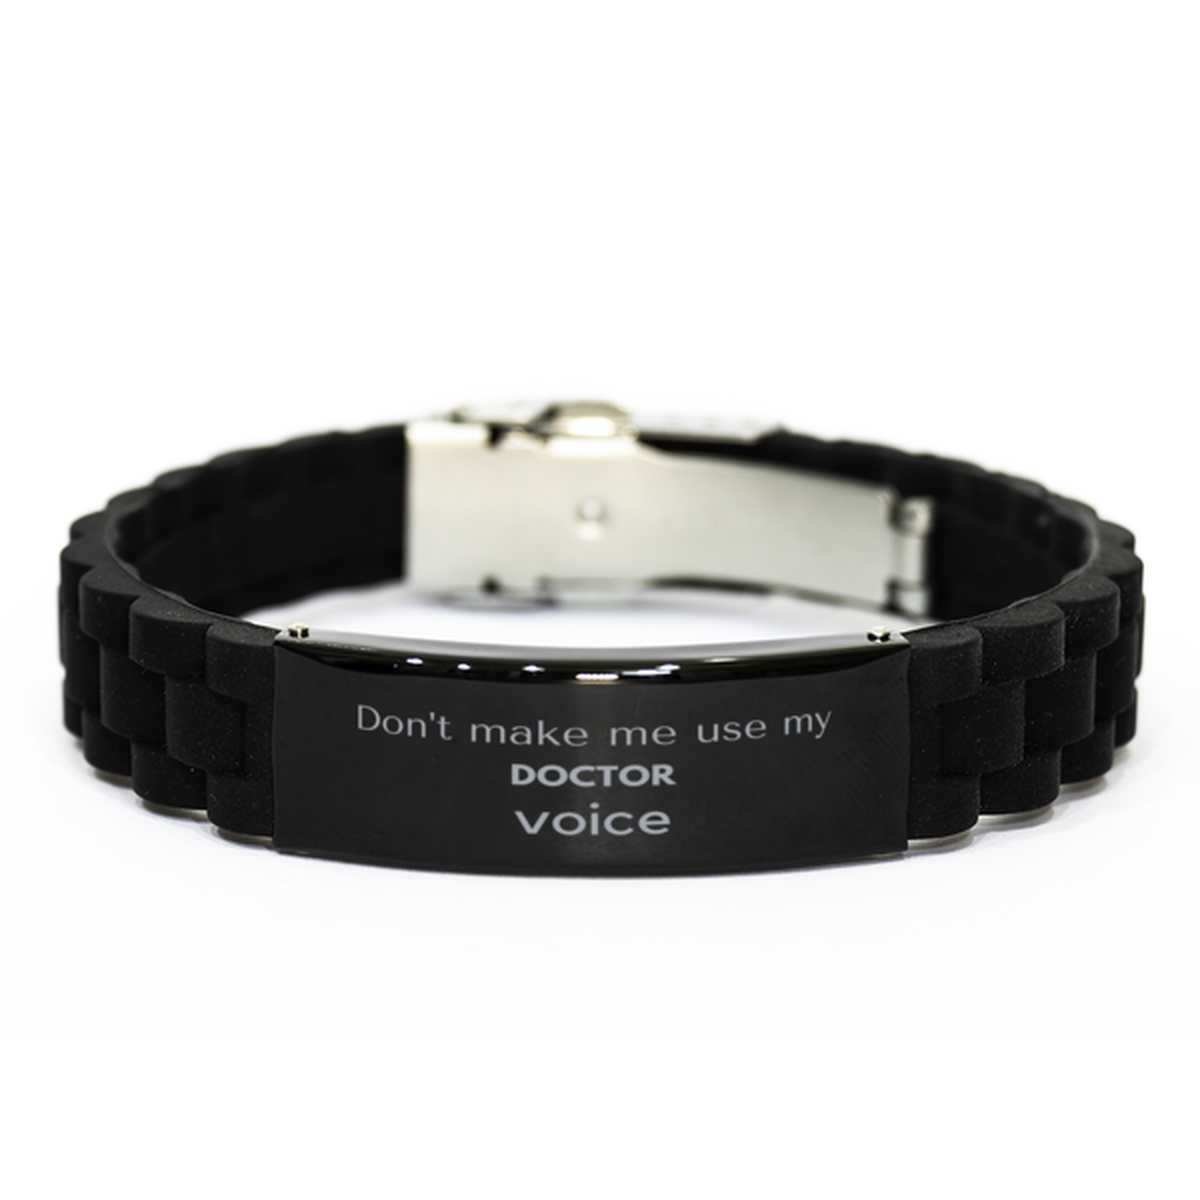 Don't make me use my Doctor voice, Sarcasm Doctor Gifts, Christmas Doctor Black Glidelock Clasp Bracelet Birthday Unique Gifts For Doctor Coworkers, Men, Women, Colleague, Friends